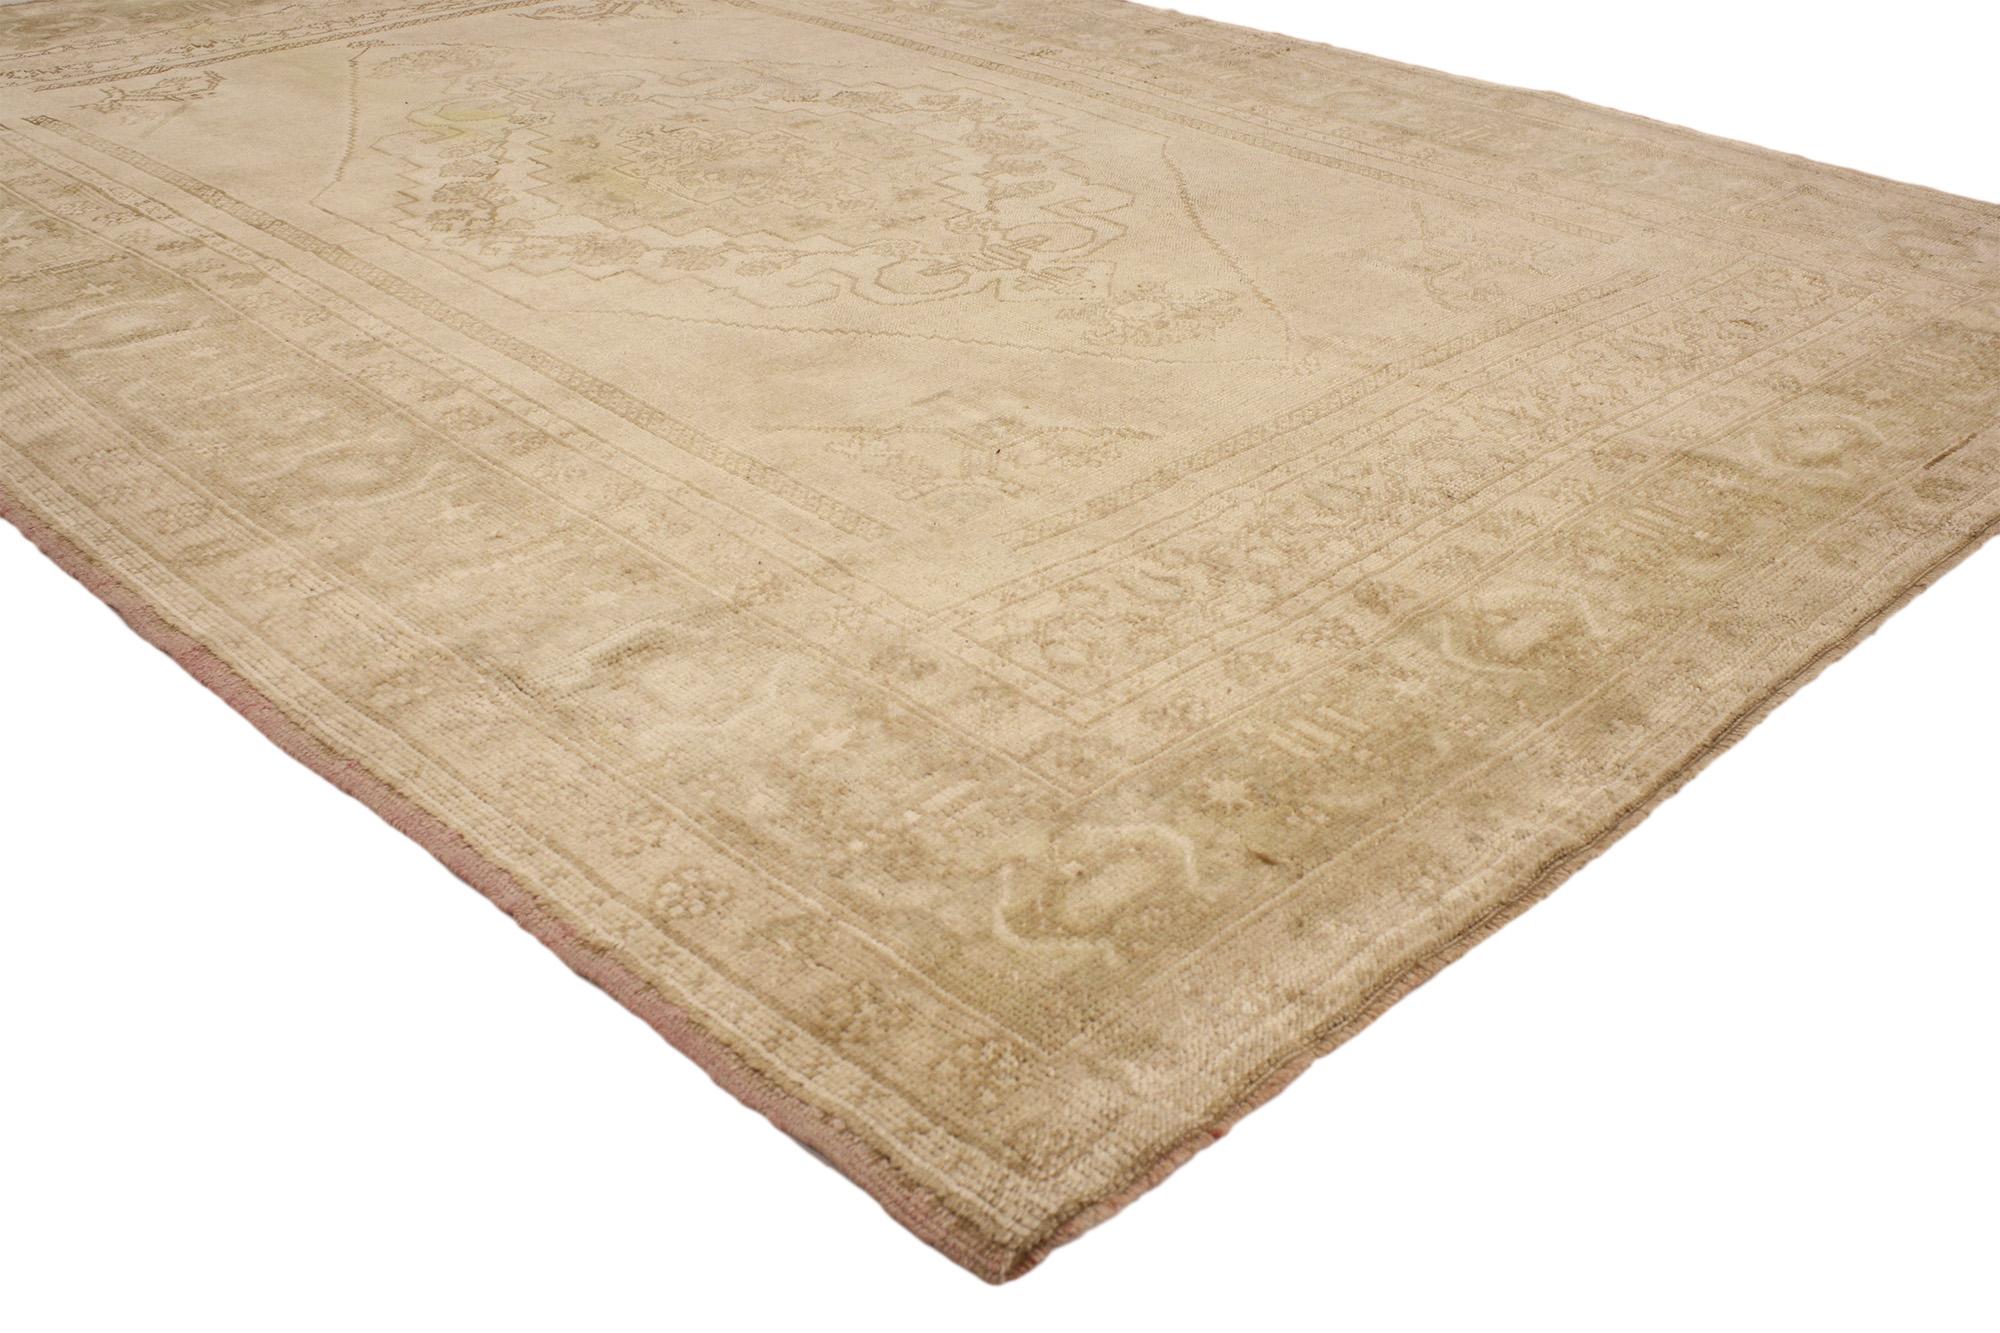 52182 Vintage Neutral Turkish Oushak Rug, 05’10 x 08’03. Imbued with timeless tradition and crafted with meticulous artisanal skill, antique-washed Turkish Oushak rugs originate from the revered Oushak region, where they undergo a meticulous washing